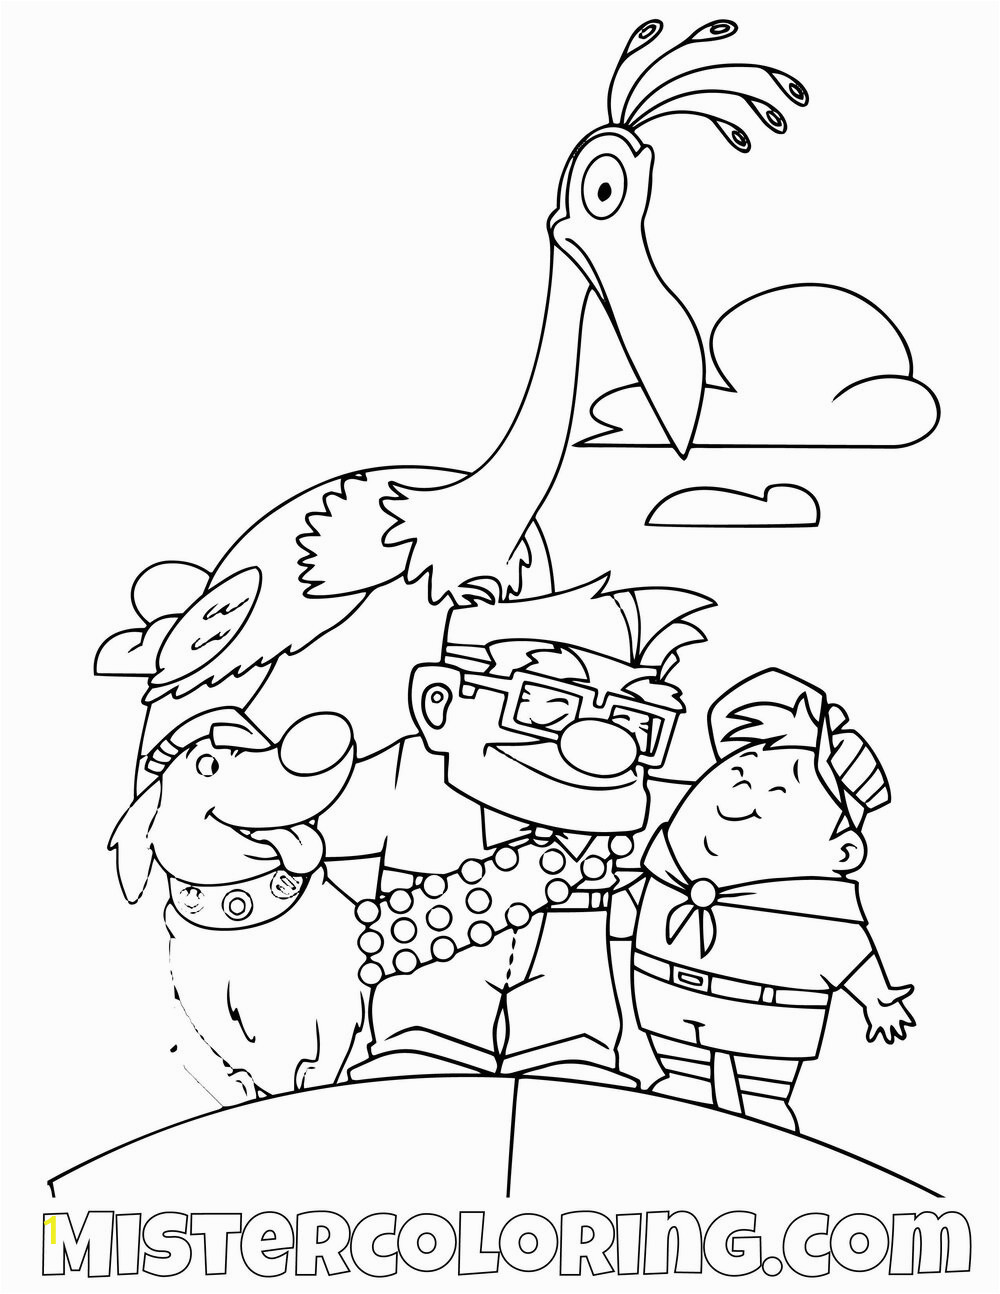 Carl Dug Kevin And Russell Portrait Disney Pixar Up Movie Coloring Pages For Kids